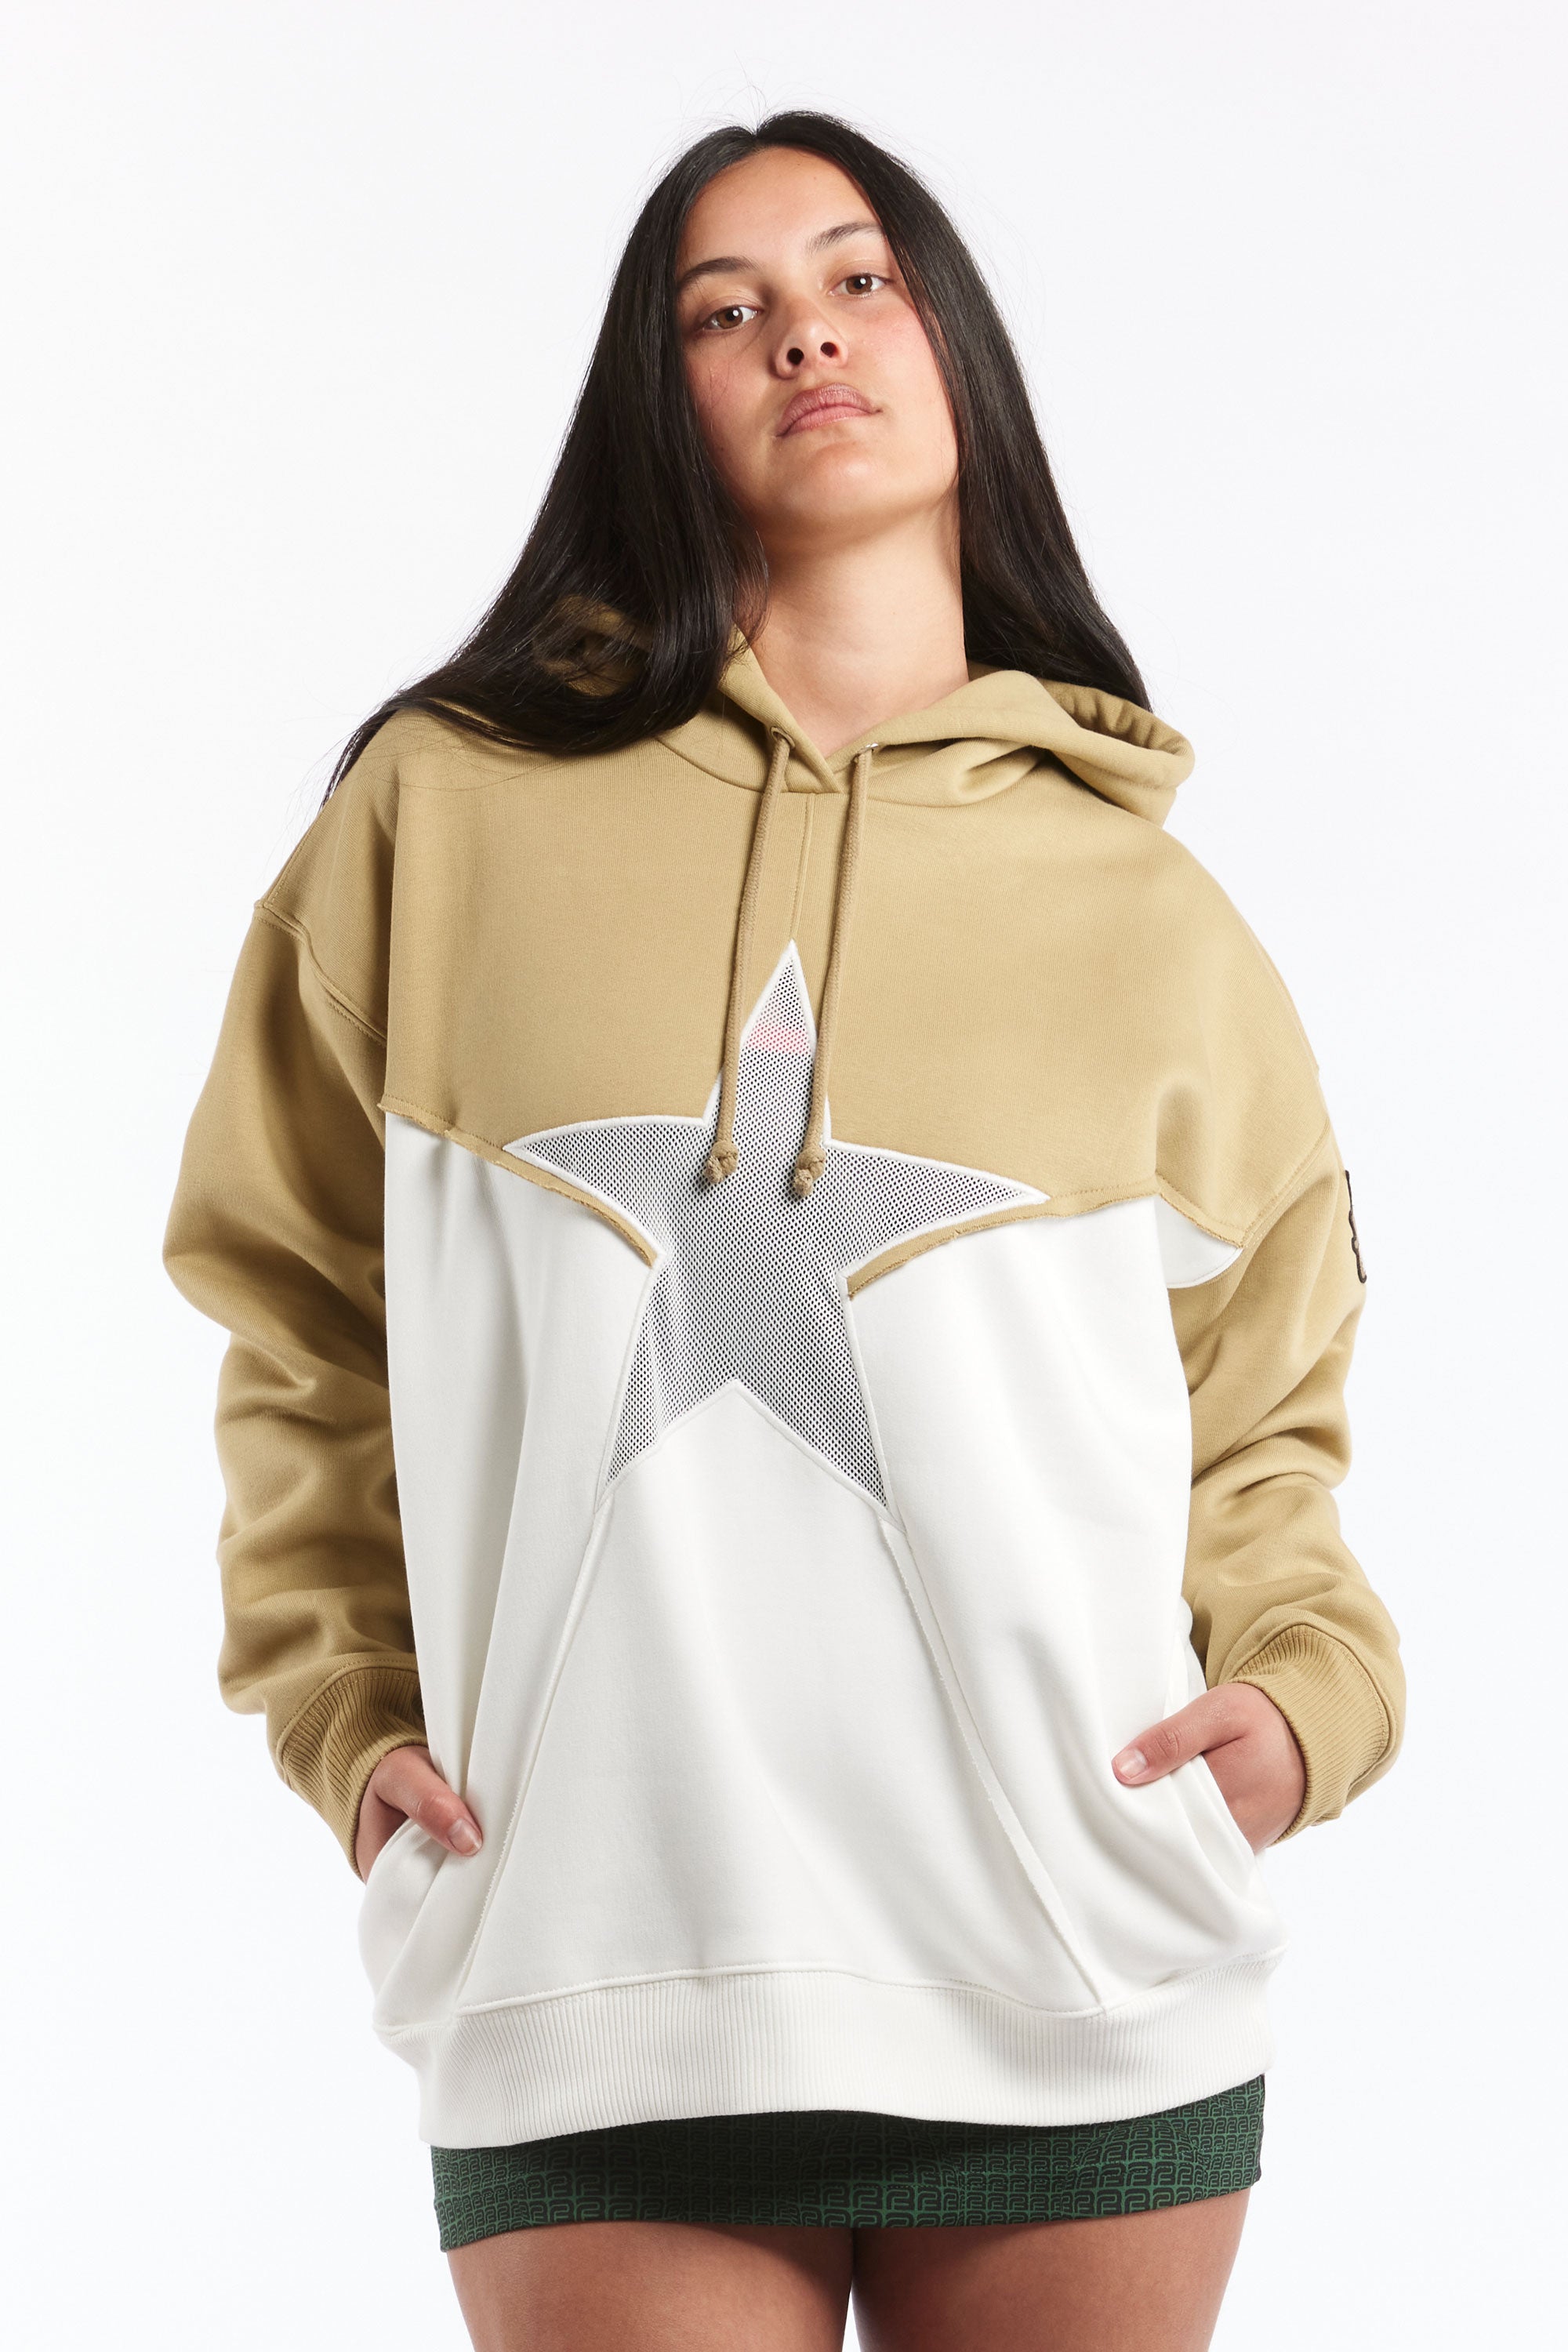 The HEAVEN - BARRAGAN STAR INSERT HOODIE  available online with global shipping, and in PAM Stores Melbourne and Sydney.